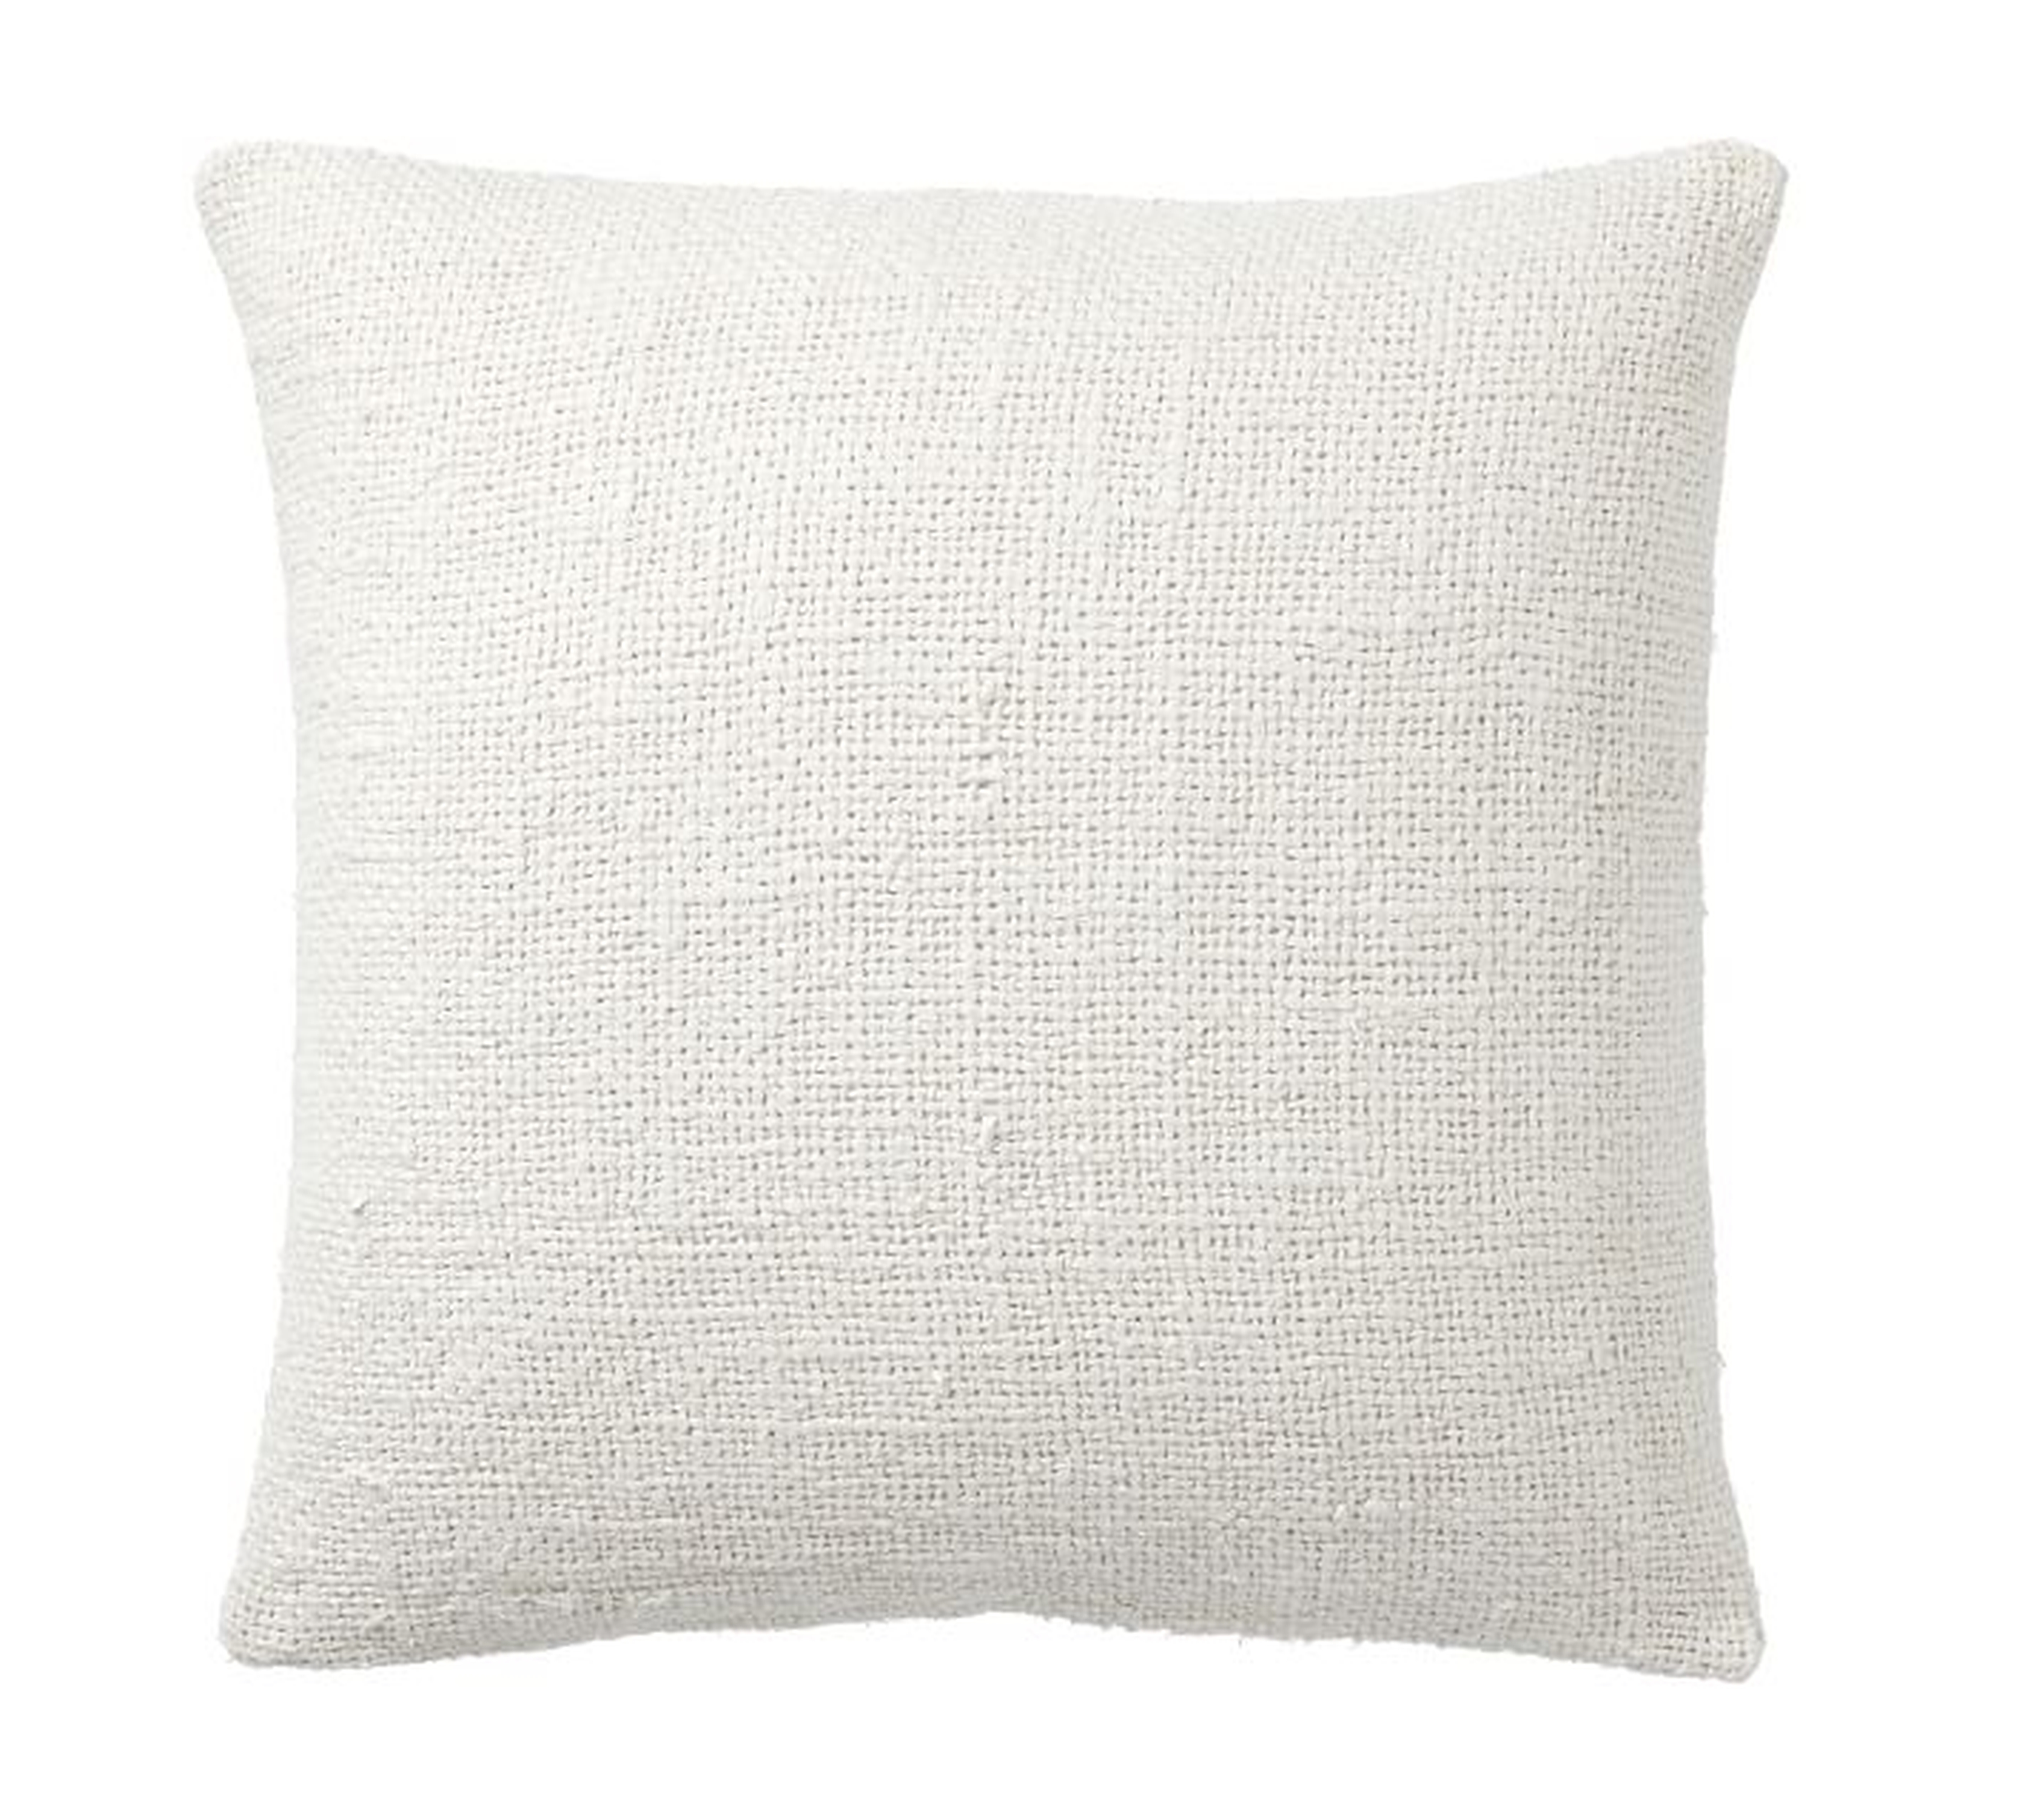 FAYE TEXTURED LINEN PILLOW COVER - IVORY - Pottery Barn